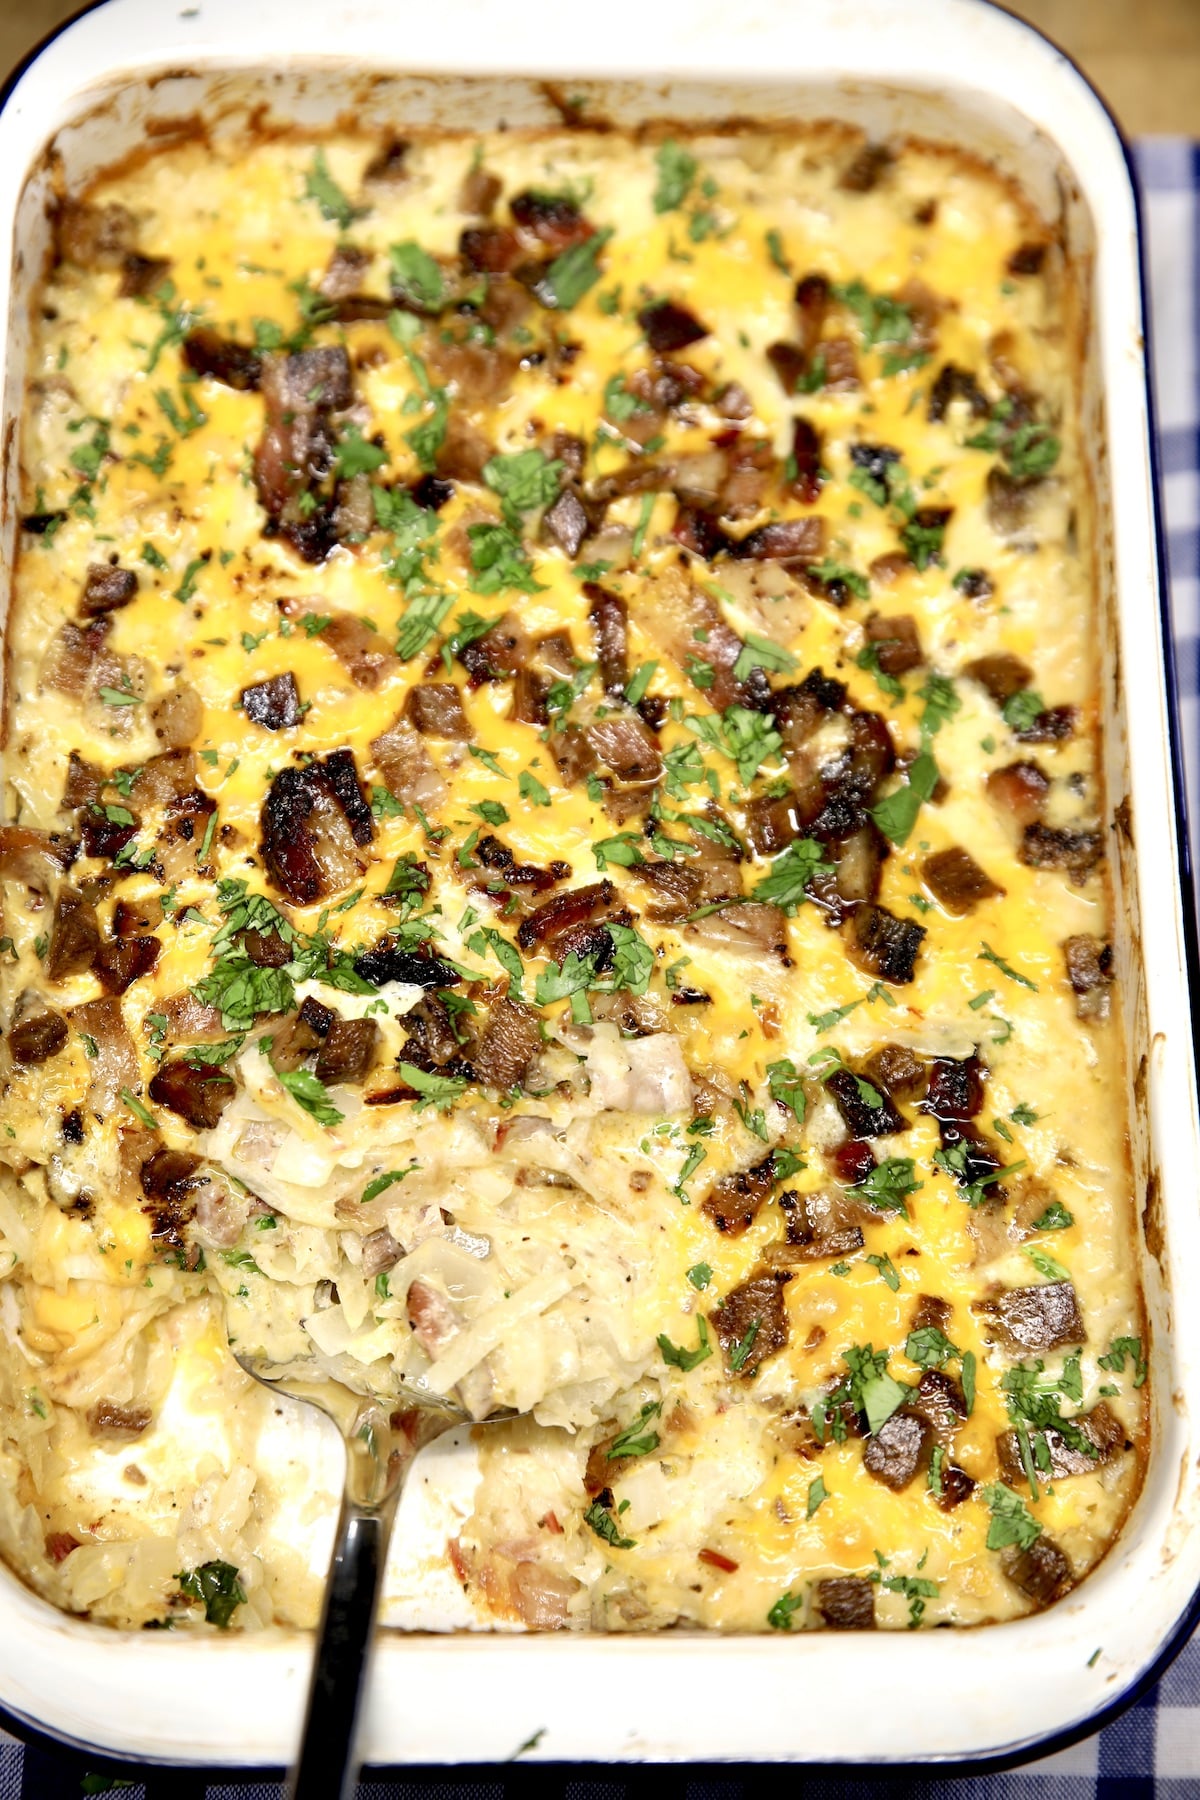 Hashbrown casserole with brisket in a baking dish, spatula serving.